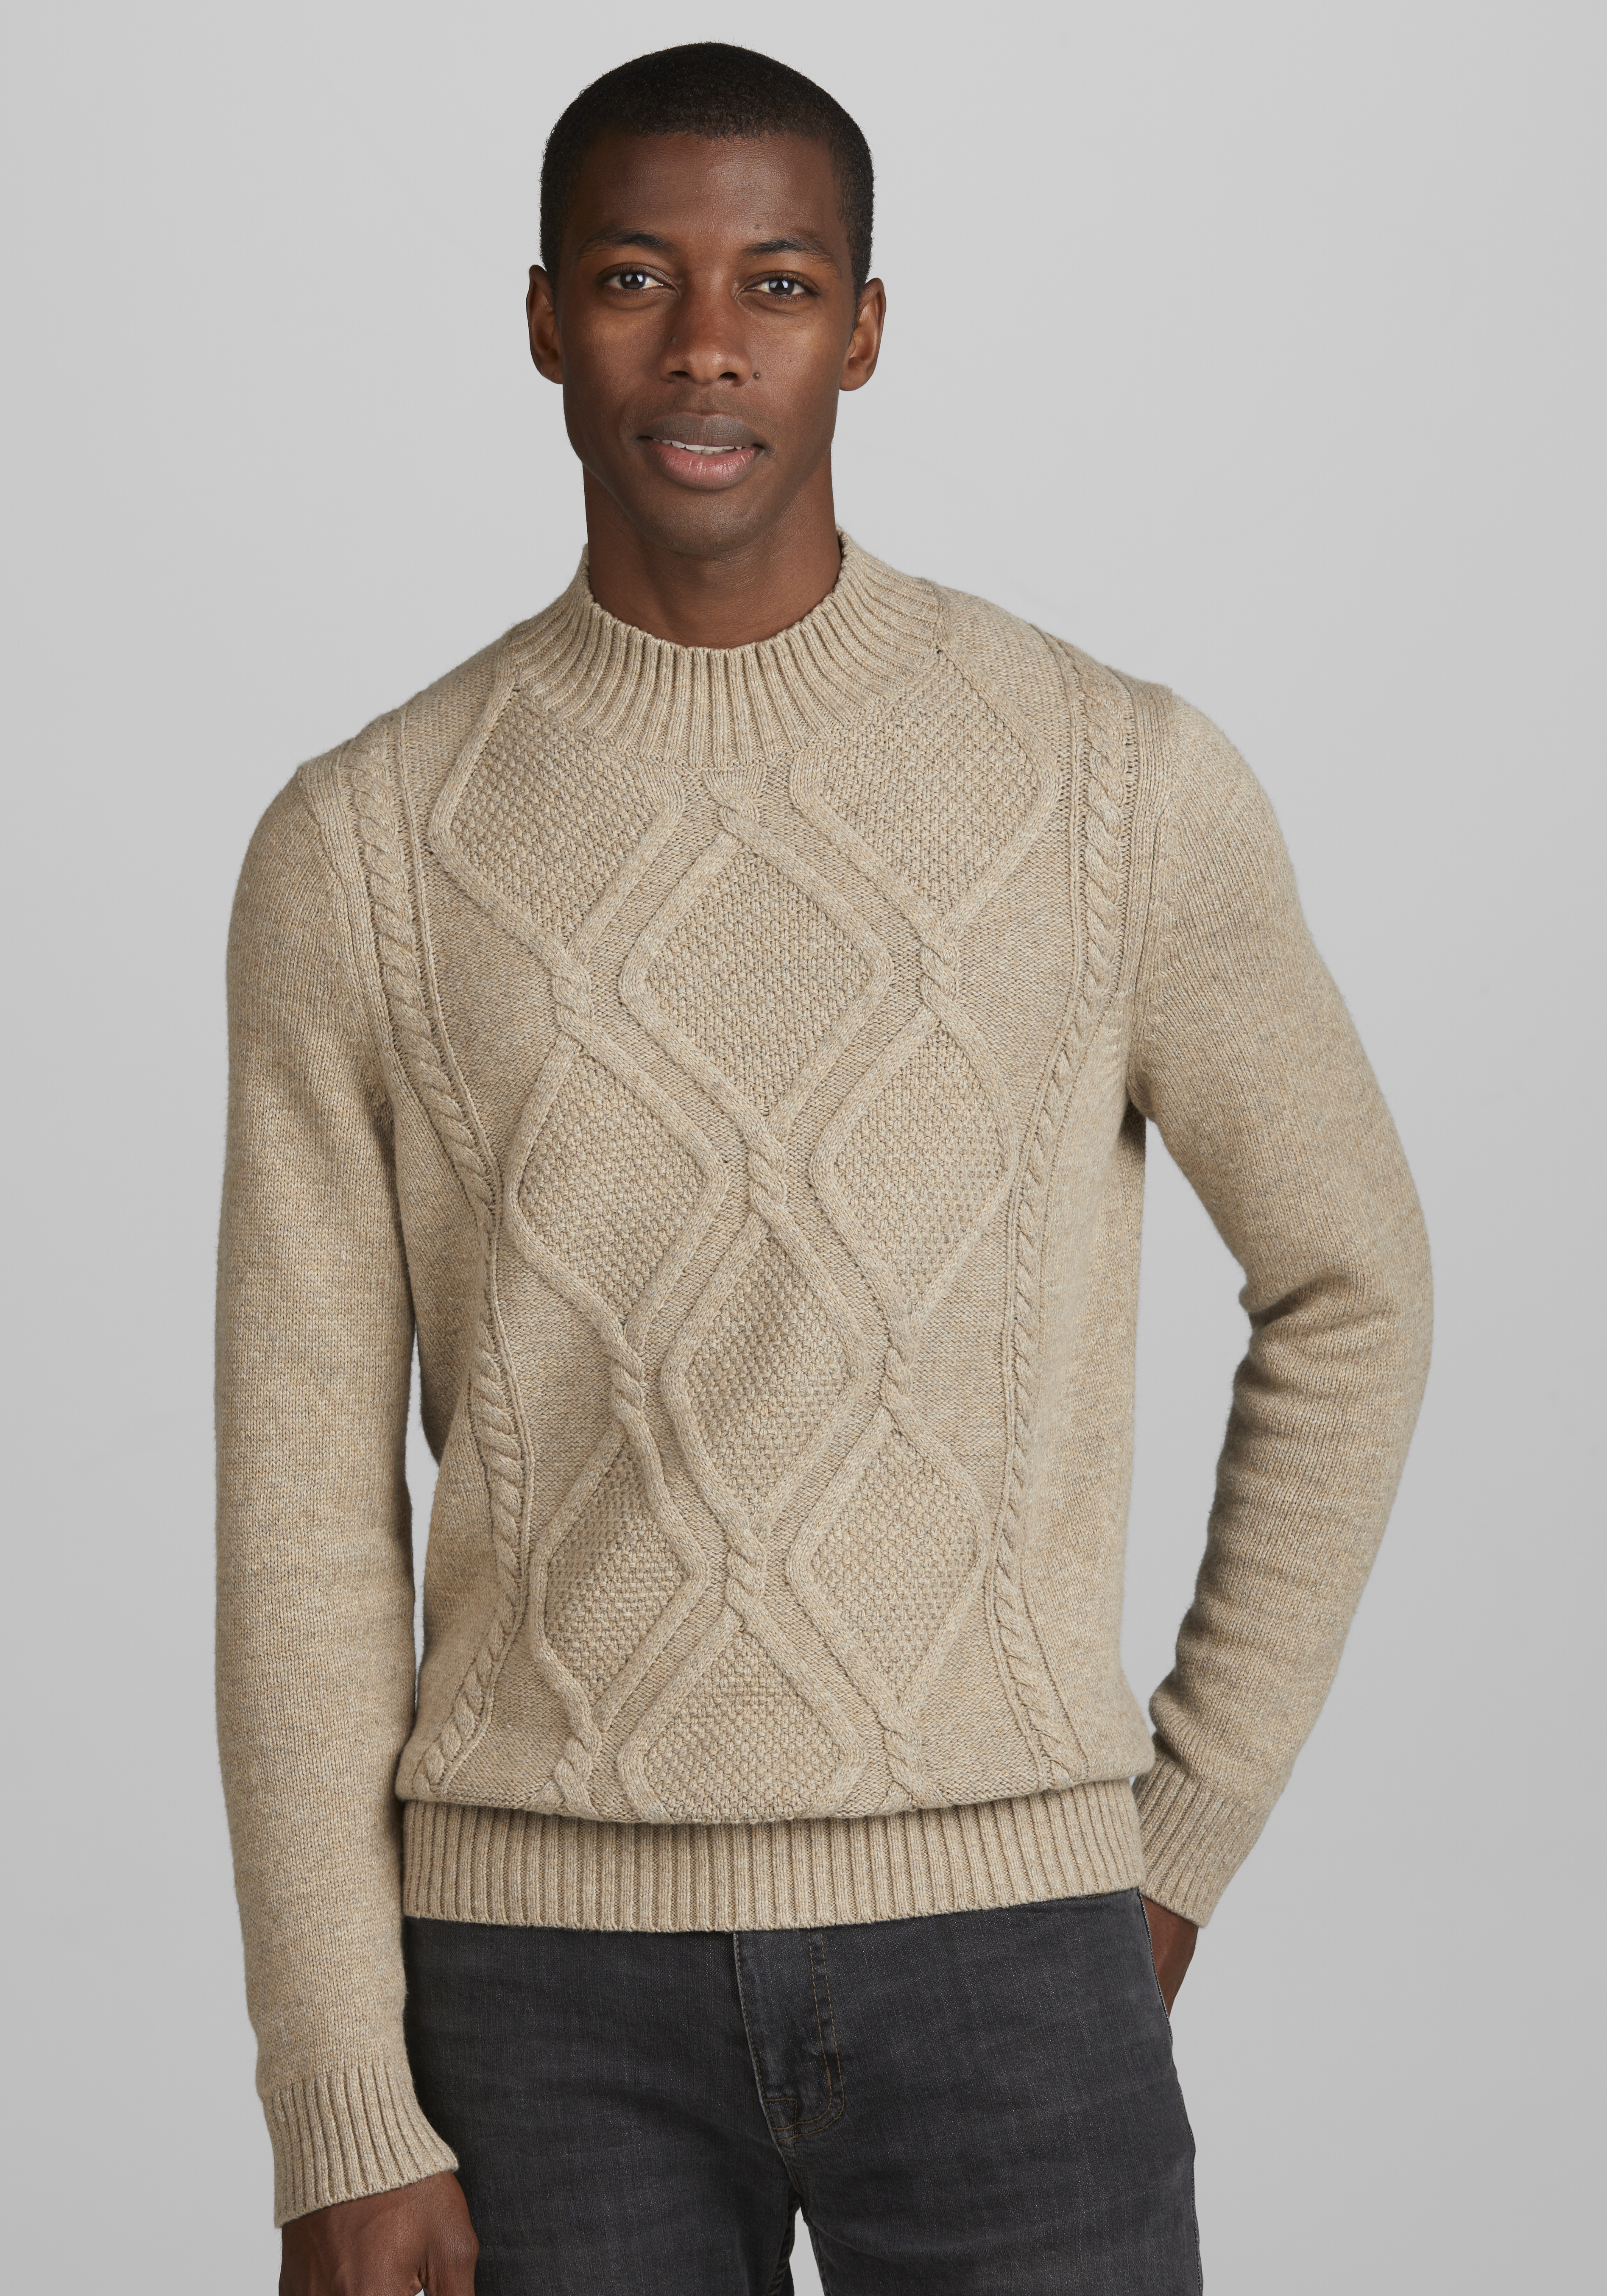 Cotton Blend All Sweaters